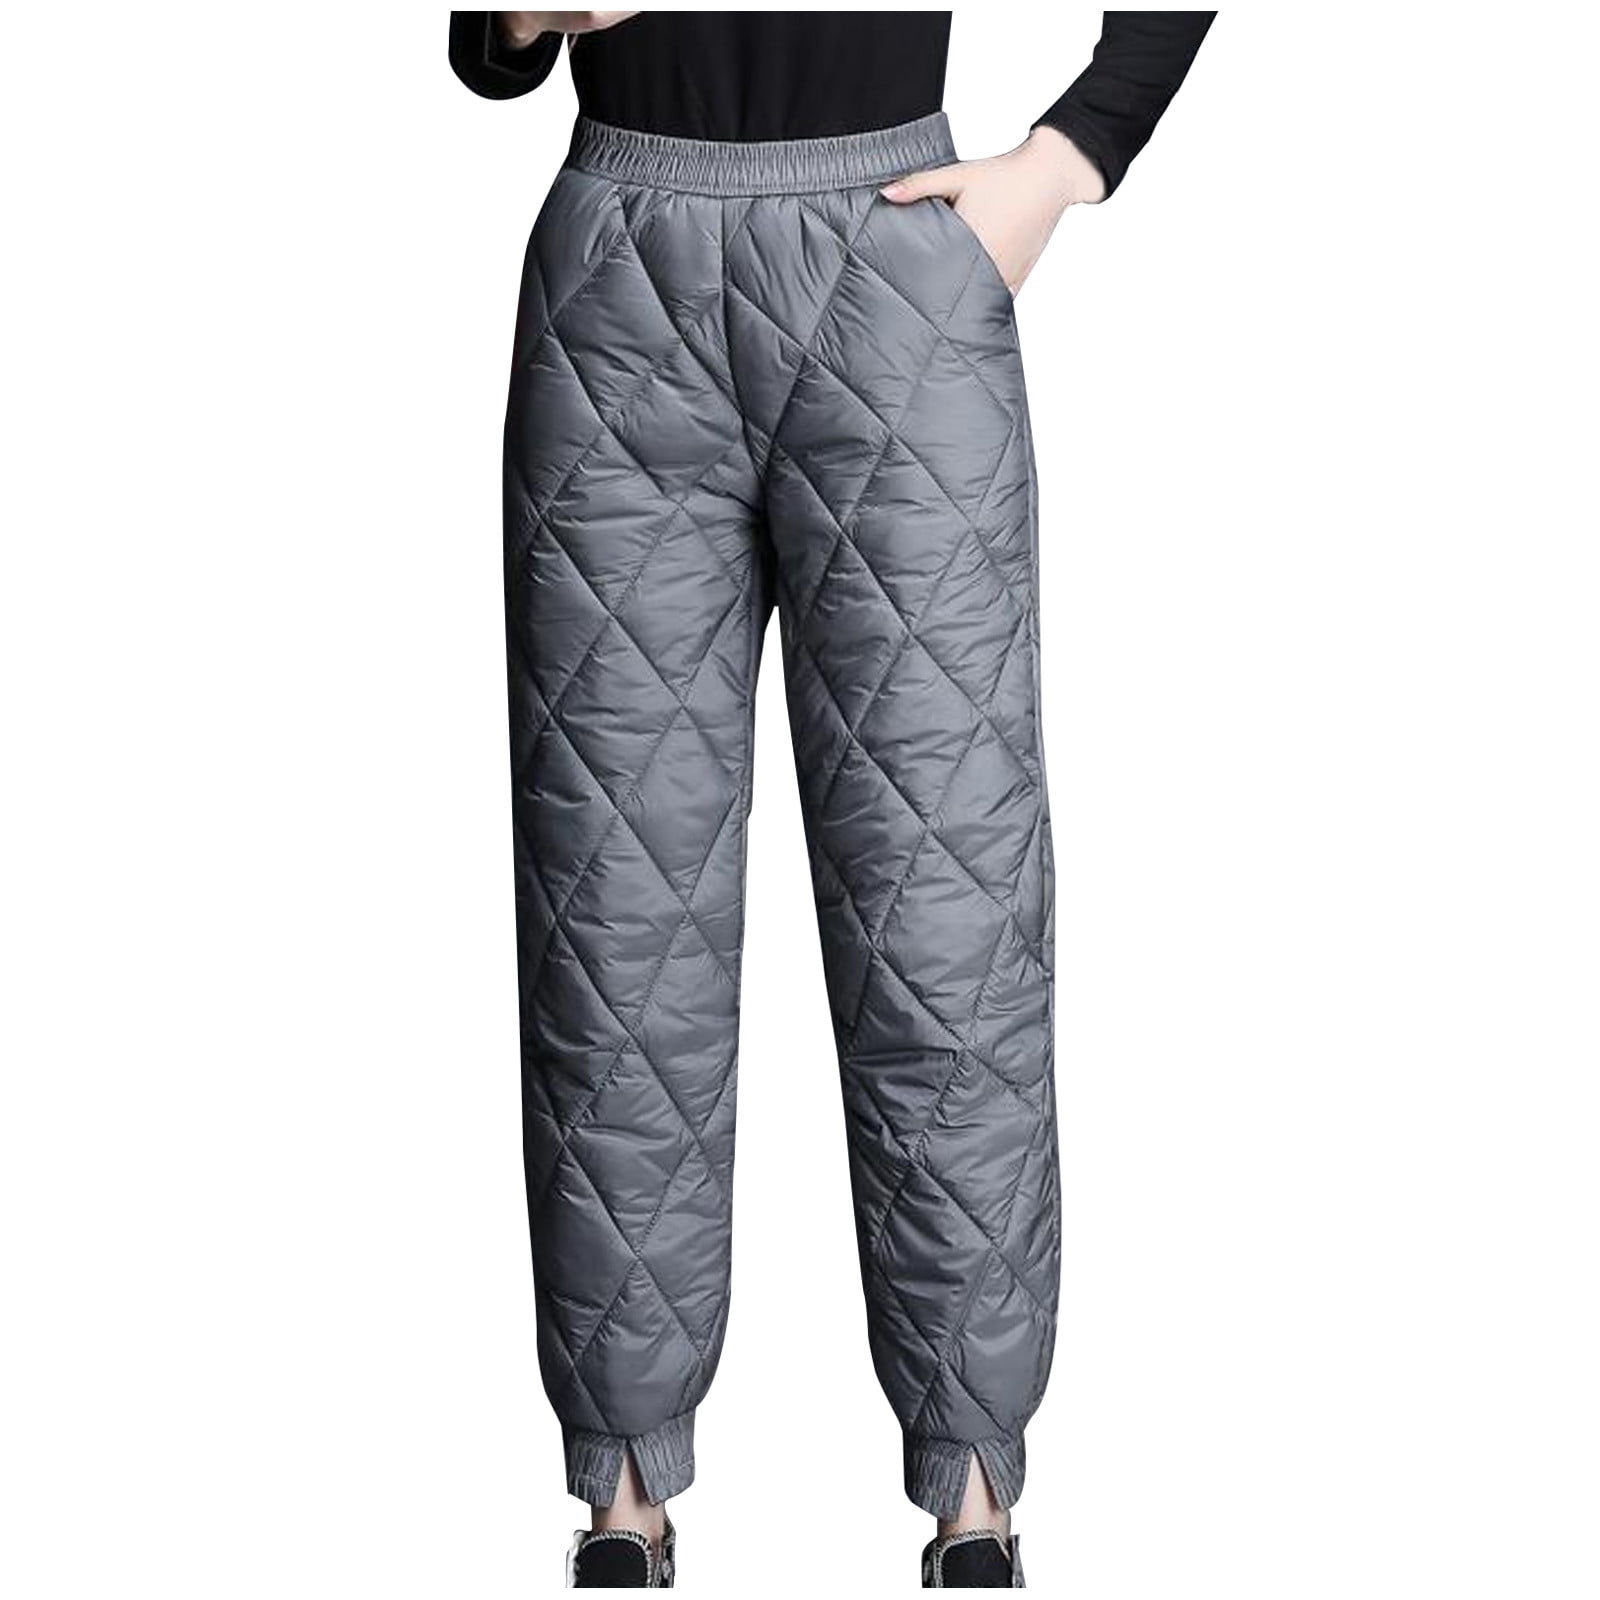 Men Thermal Plain Front Dress Pants Classic Winter Fleece Lined Insulated  Pants for Travelling Golf Business - Walmart.com